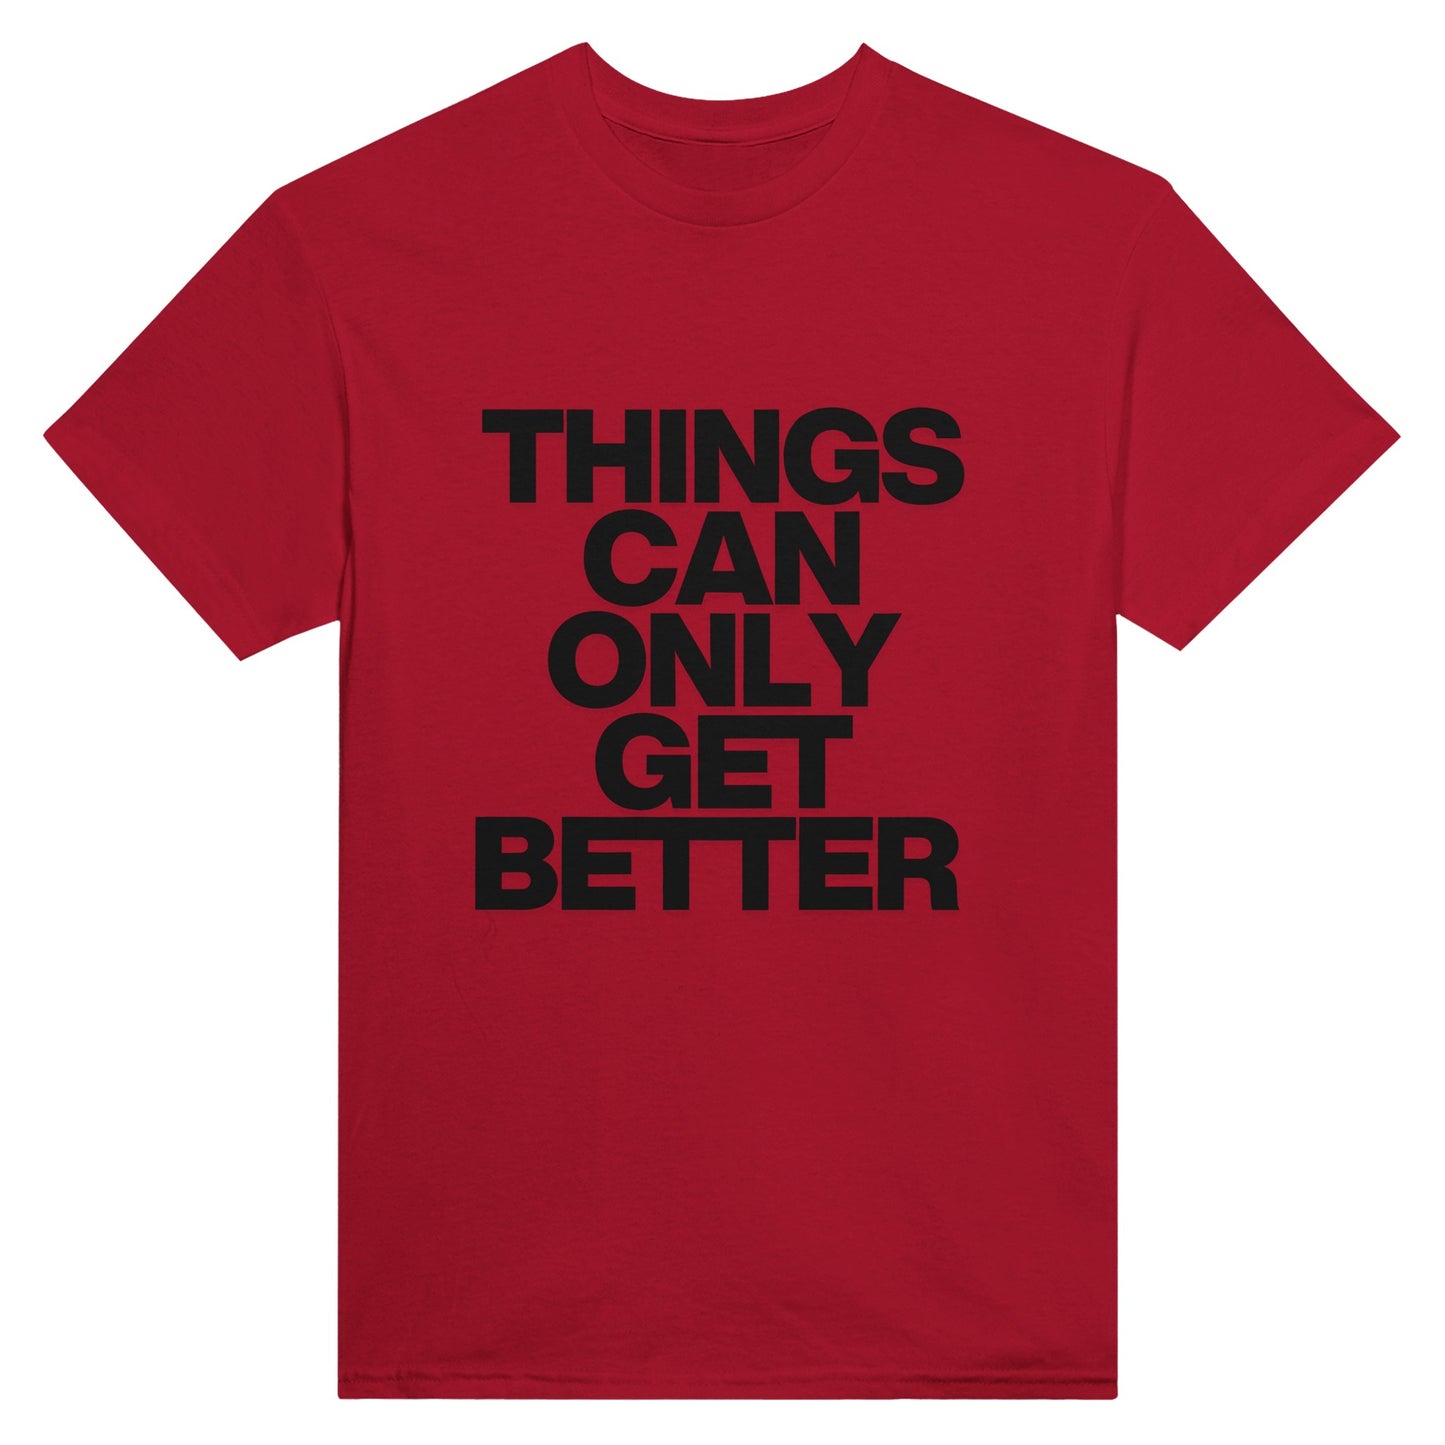 Things Can Only Get Better T-shirt in red - anti-tory election wear